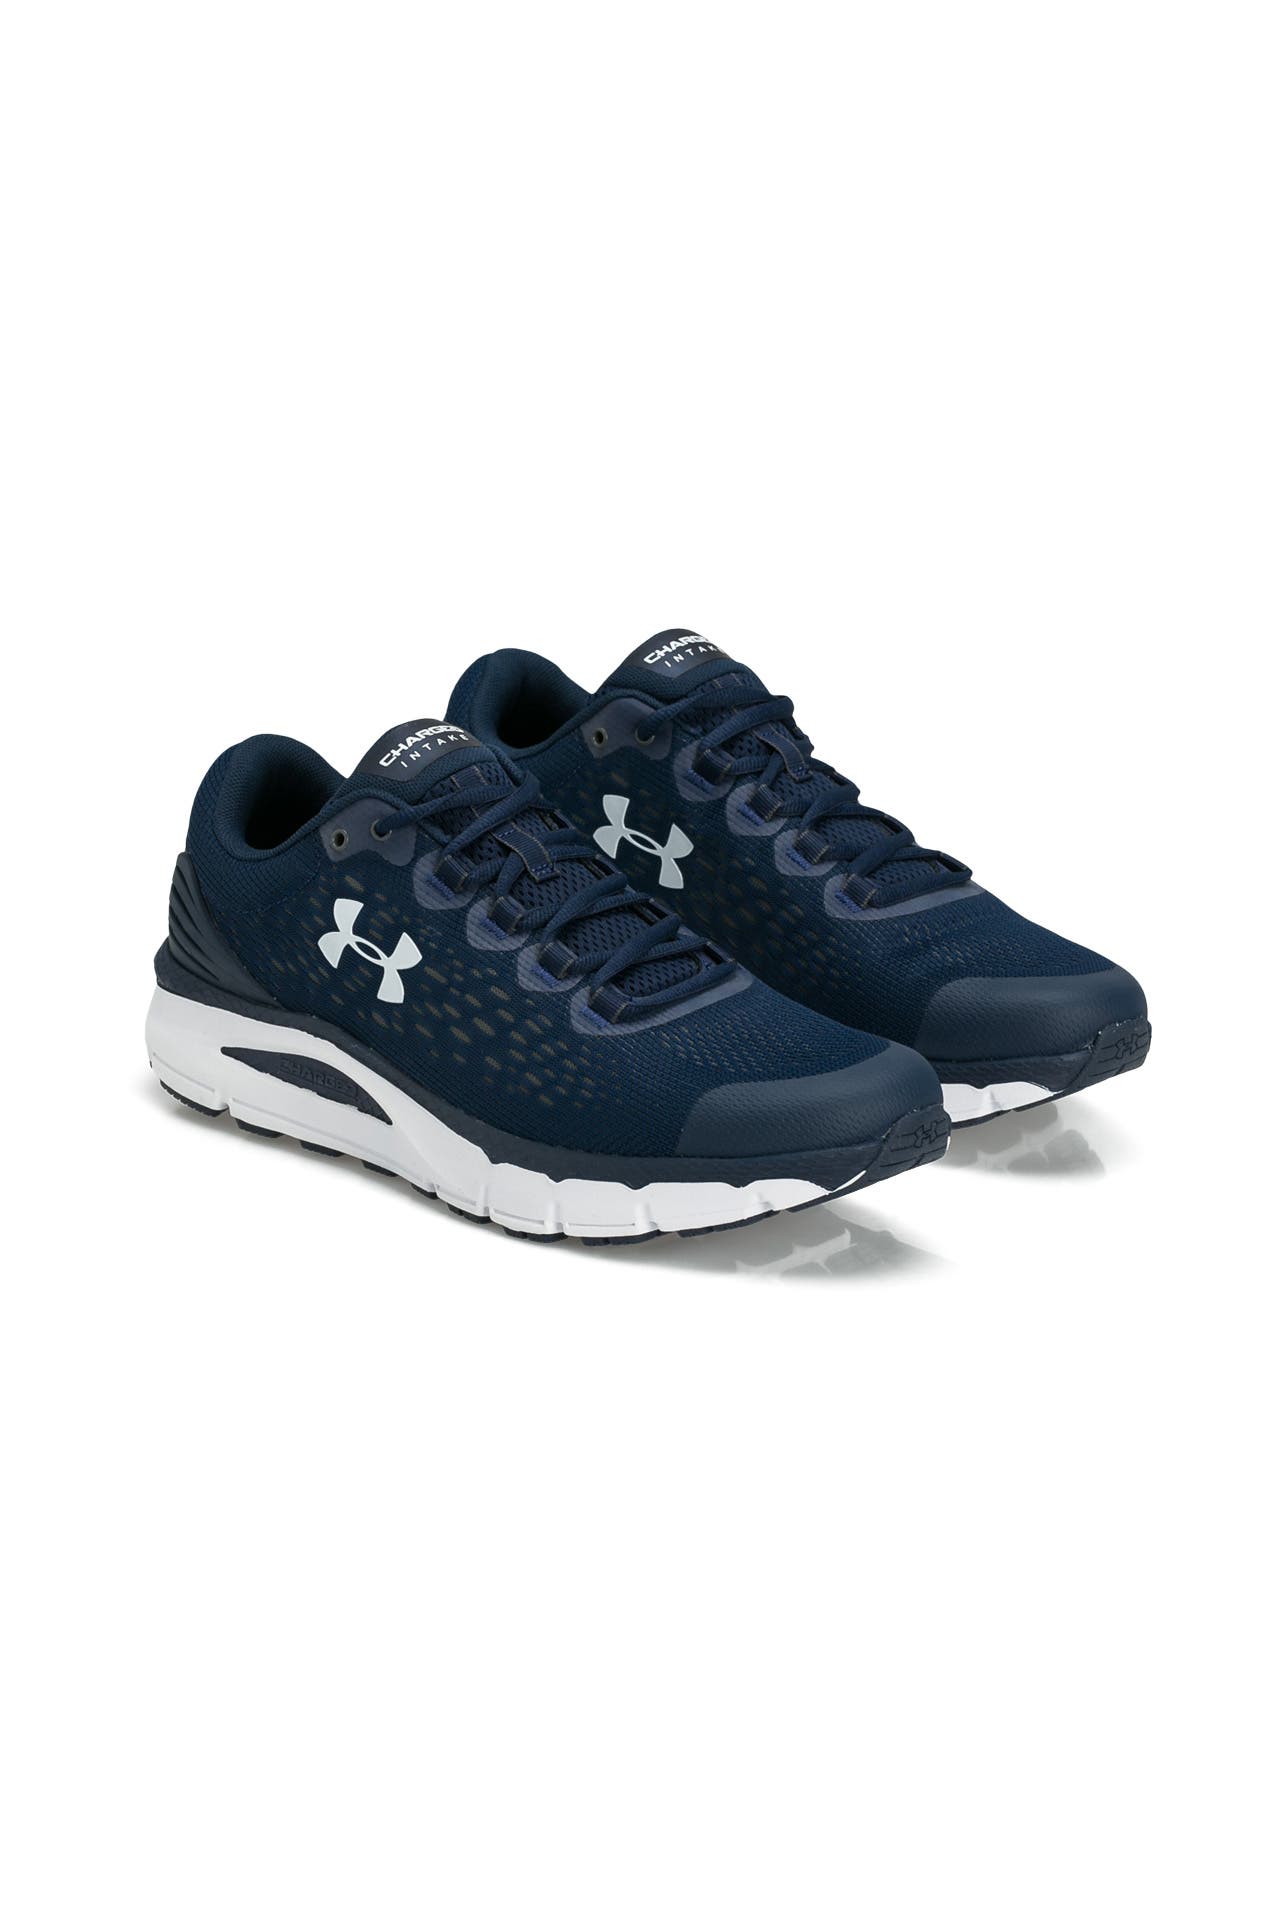 Under Armour OUTLET in Germany • Sale up to 70% | OUTLETCITY METZINGEN